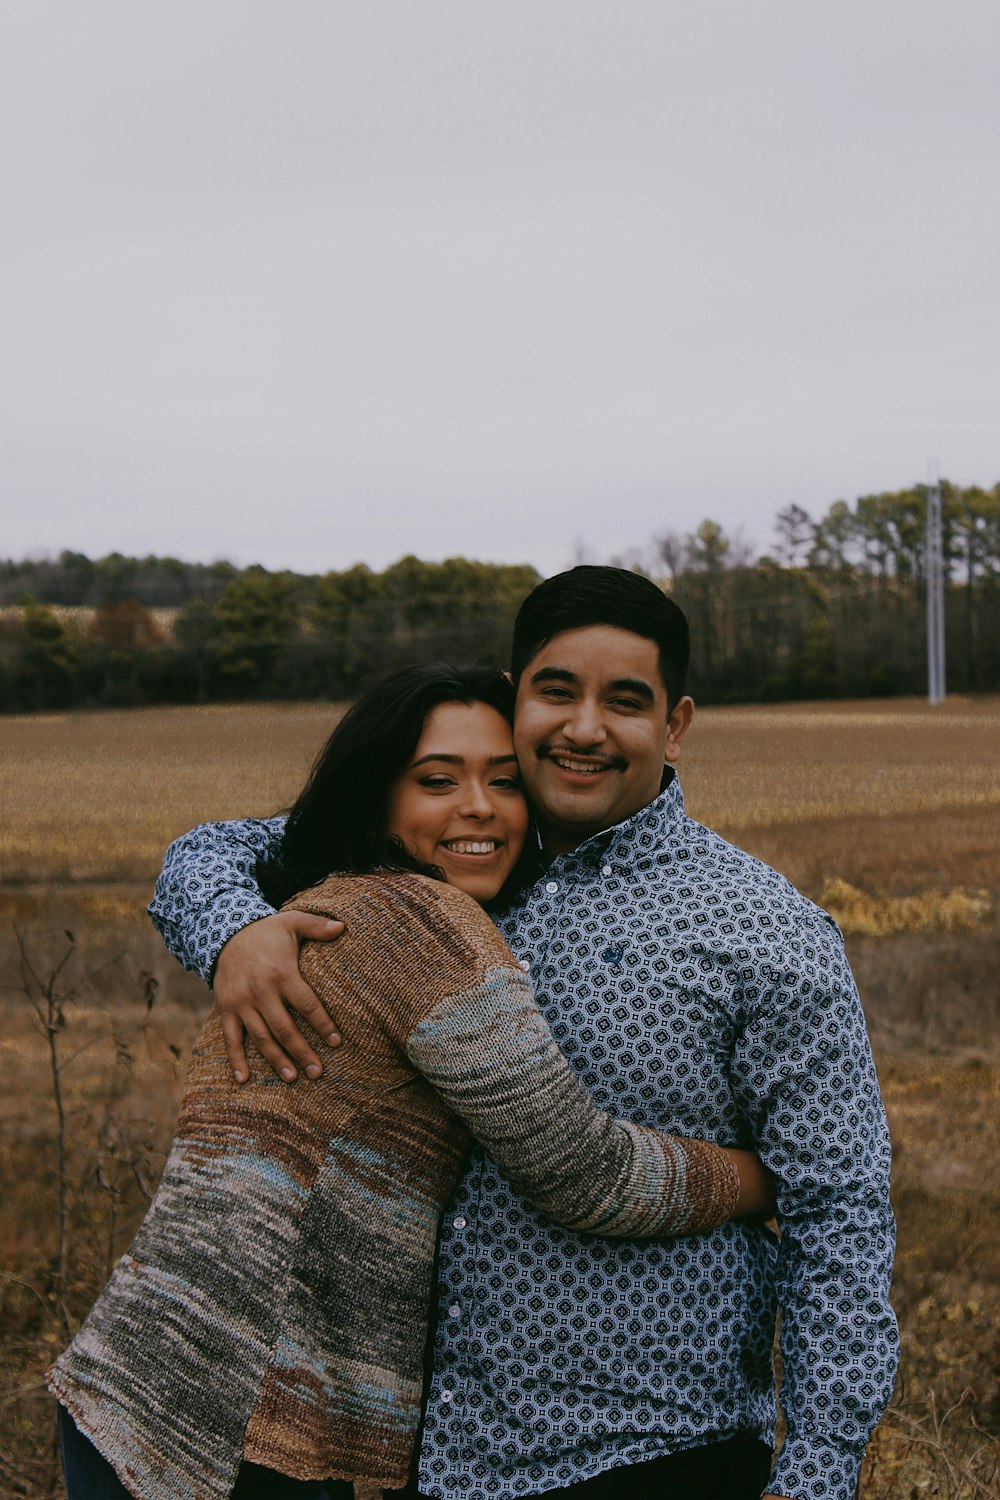 woman smiling and hugging smiling man during day